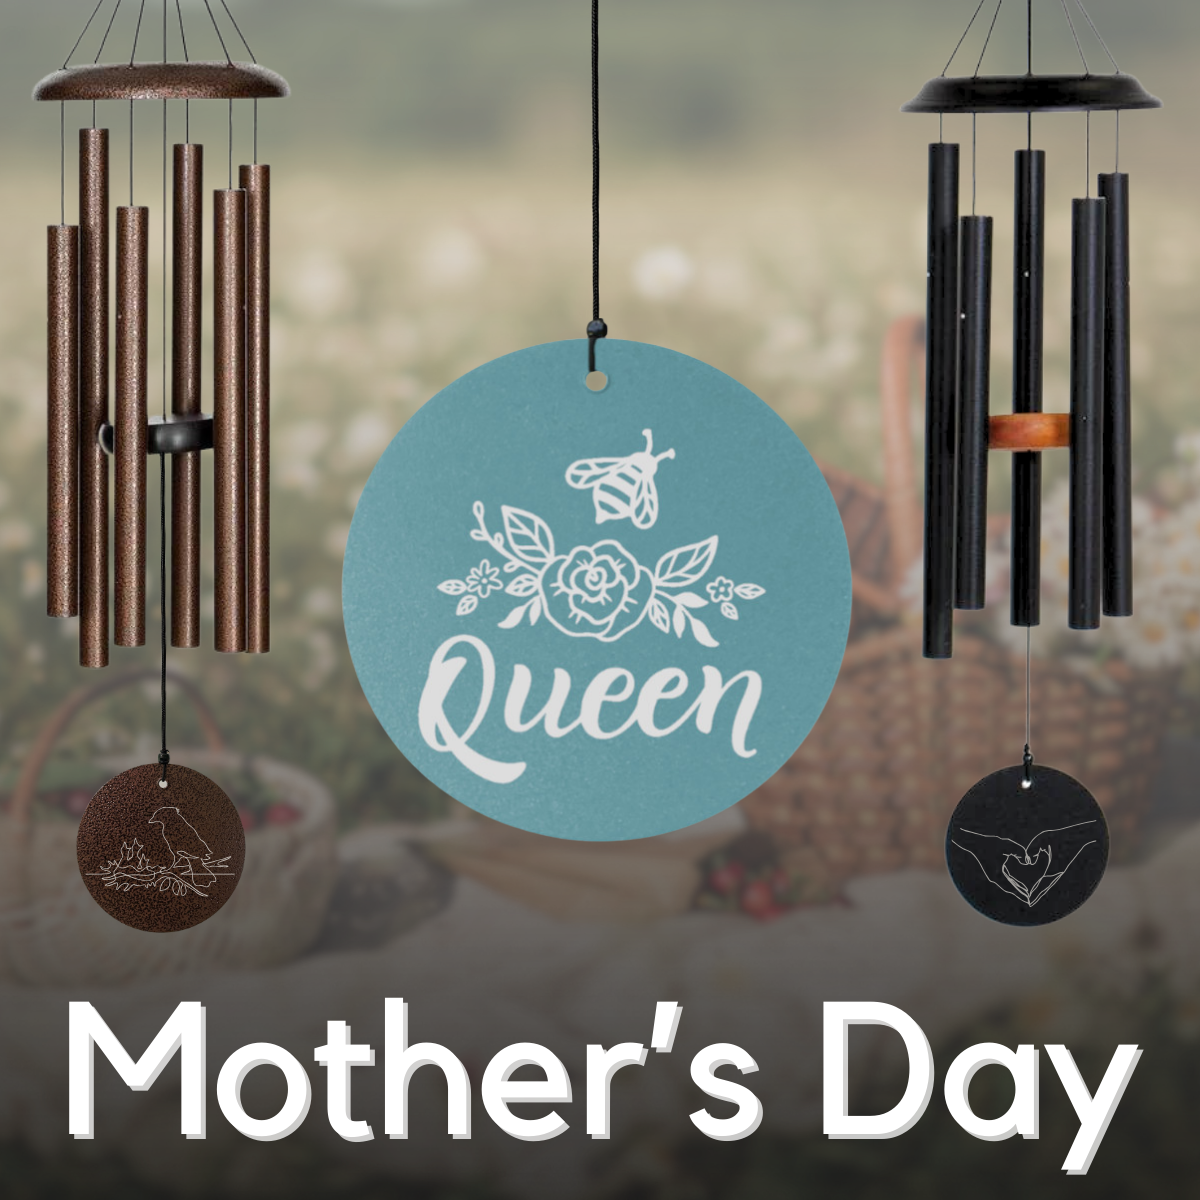 Custom Engraved Wind Chimes | Order Now for Mother's Day